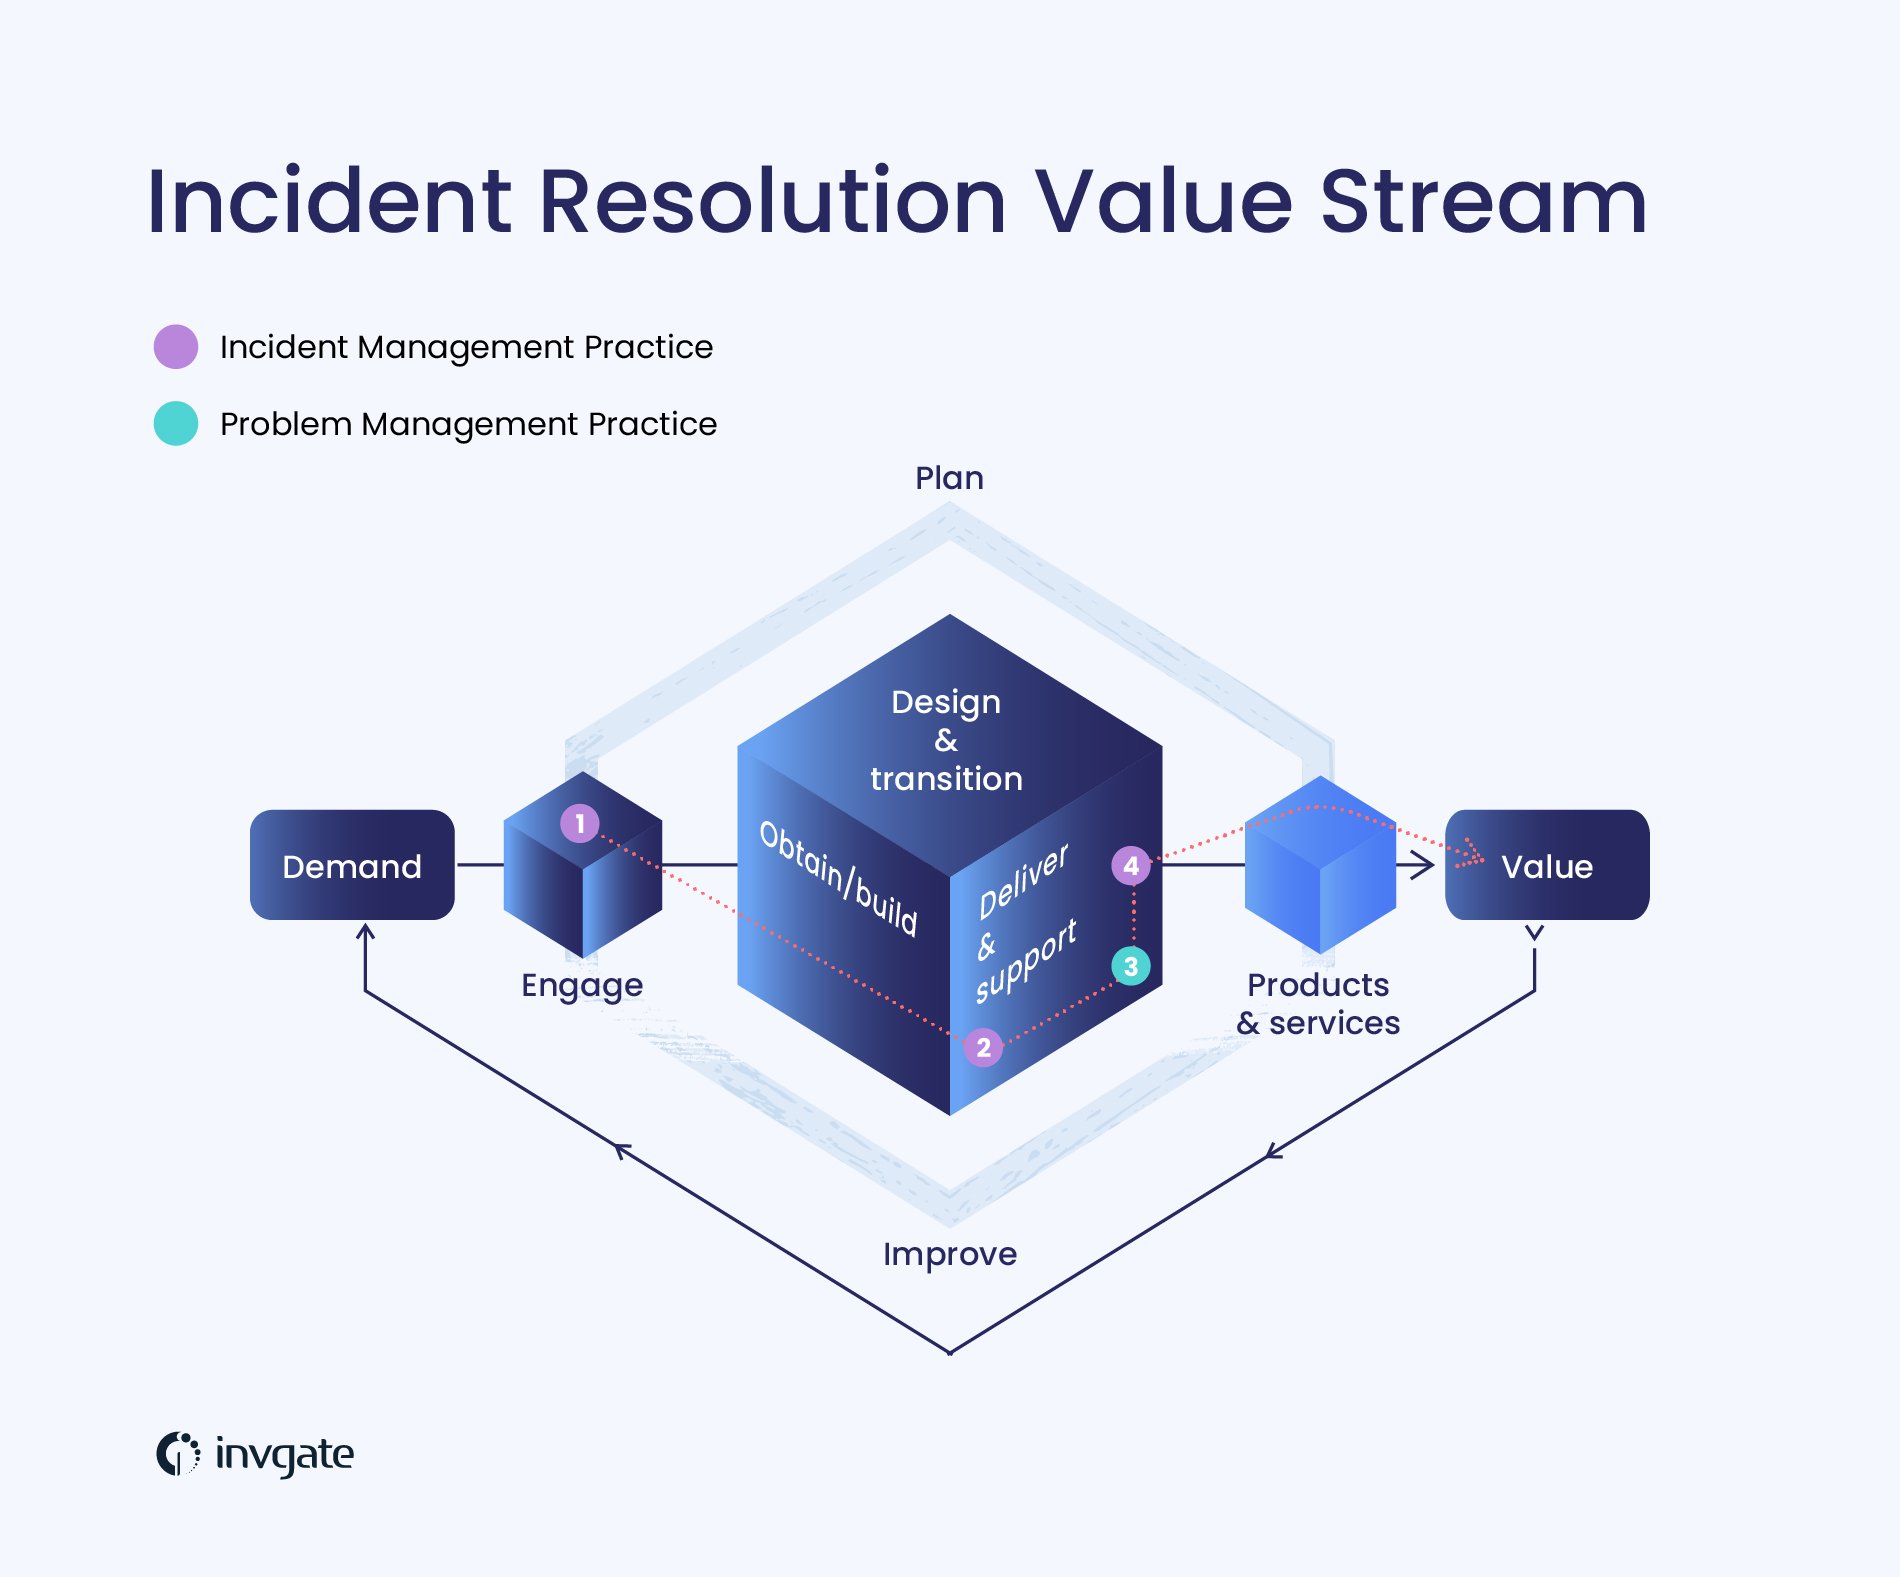 Incident resolution value stream - Best practices for incident management.